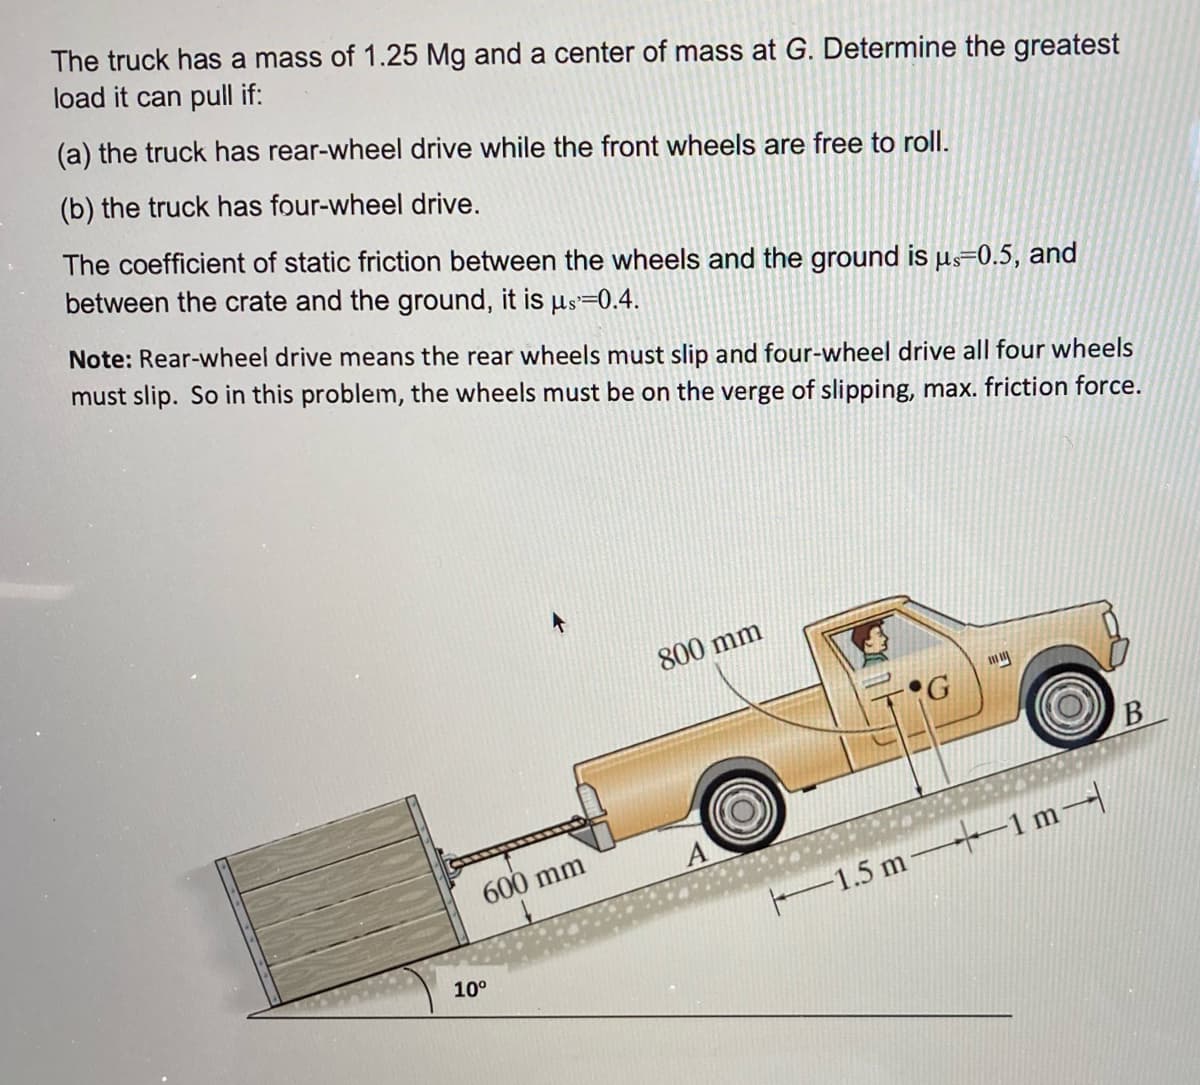 The truck has a mass of 1.25 Mg and a center of mass at G. Determine the greatest
load it can pull if:
(a) the truck has rear-wheel drive while the front wheels are free to roll.
(b) the truck has four-wheel drive.
The coefficient of static friction between the wheels and the ground is µs=0.5, and
between the crate and the ground, it is us=0.4.
Note: Rear-wheel drive means the rear wheels must slip and four-wheel drive all four wheels
must slip. So in this problem, the wheels must be on the verge of slipping, max. friction force.
800 mm
600 mm
F1.5 m--–1 m
10°
